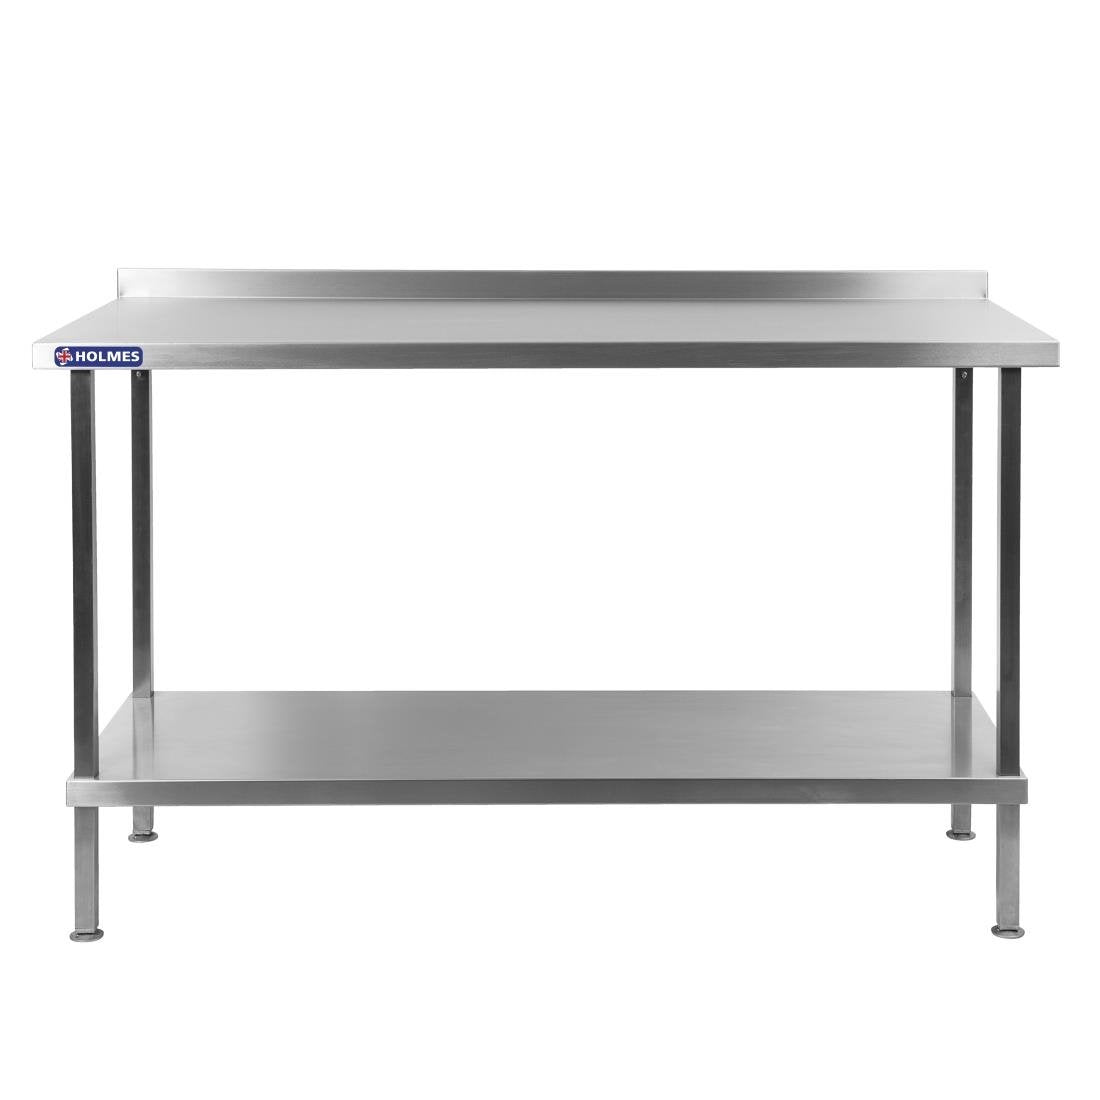 DR028 Holmes Stainless Steel Wall Table with Upstand 900mm JD Catering Equipment Solutions Ltd